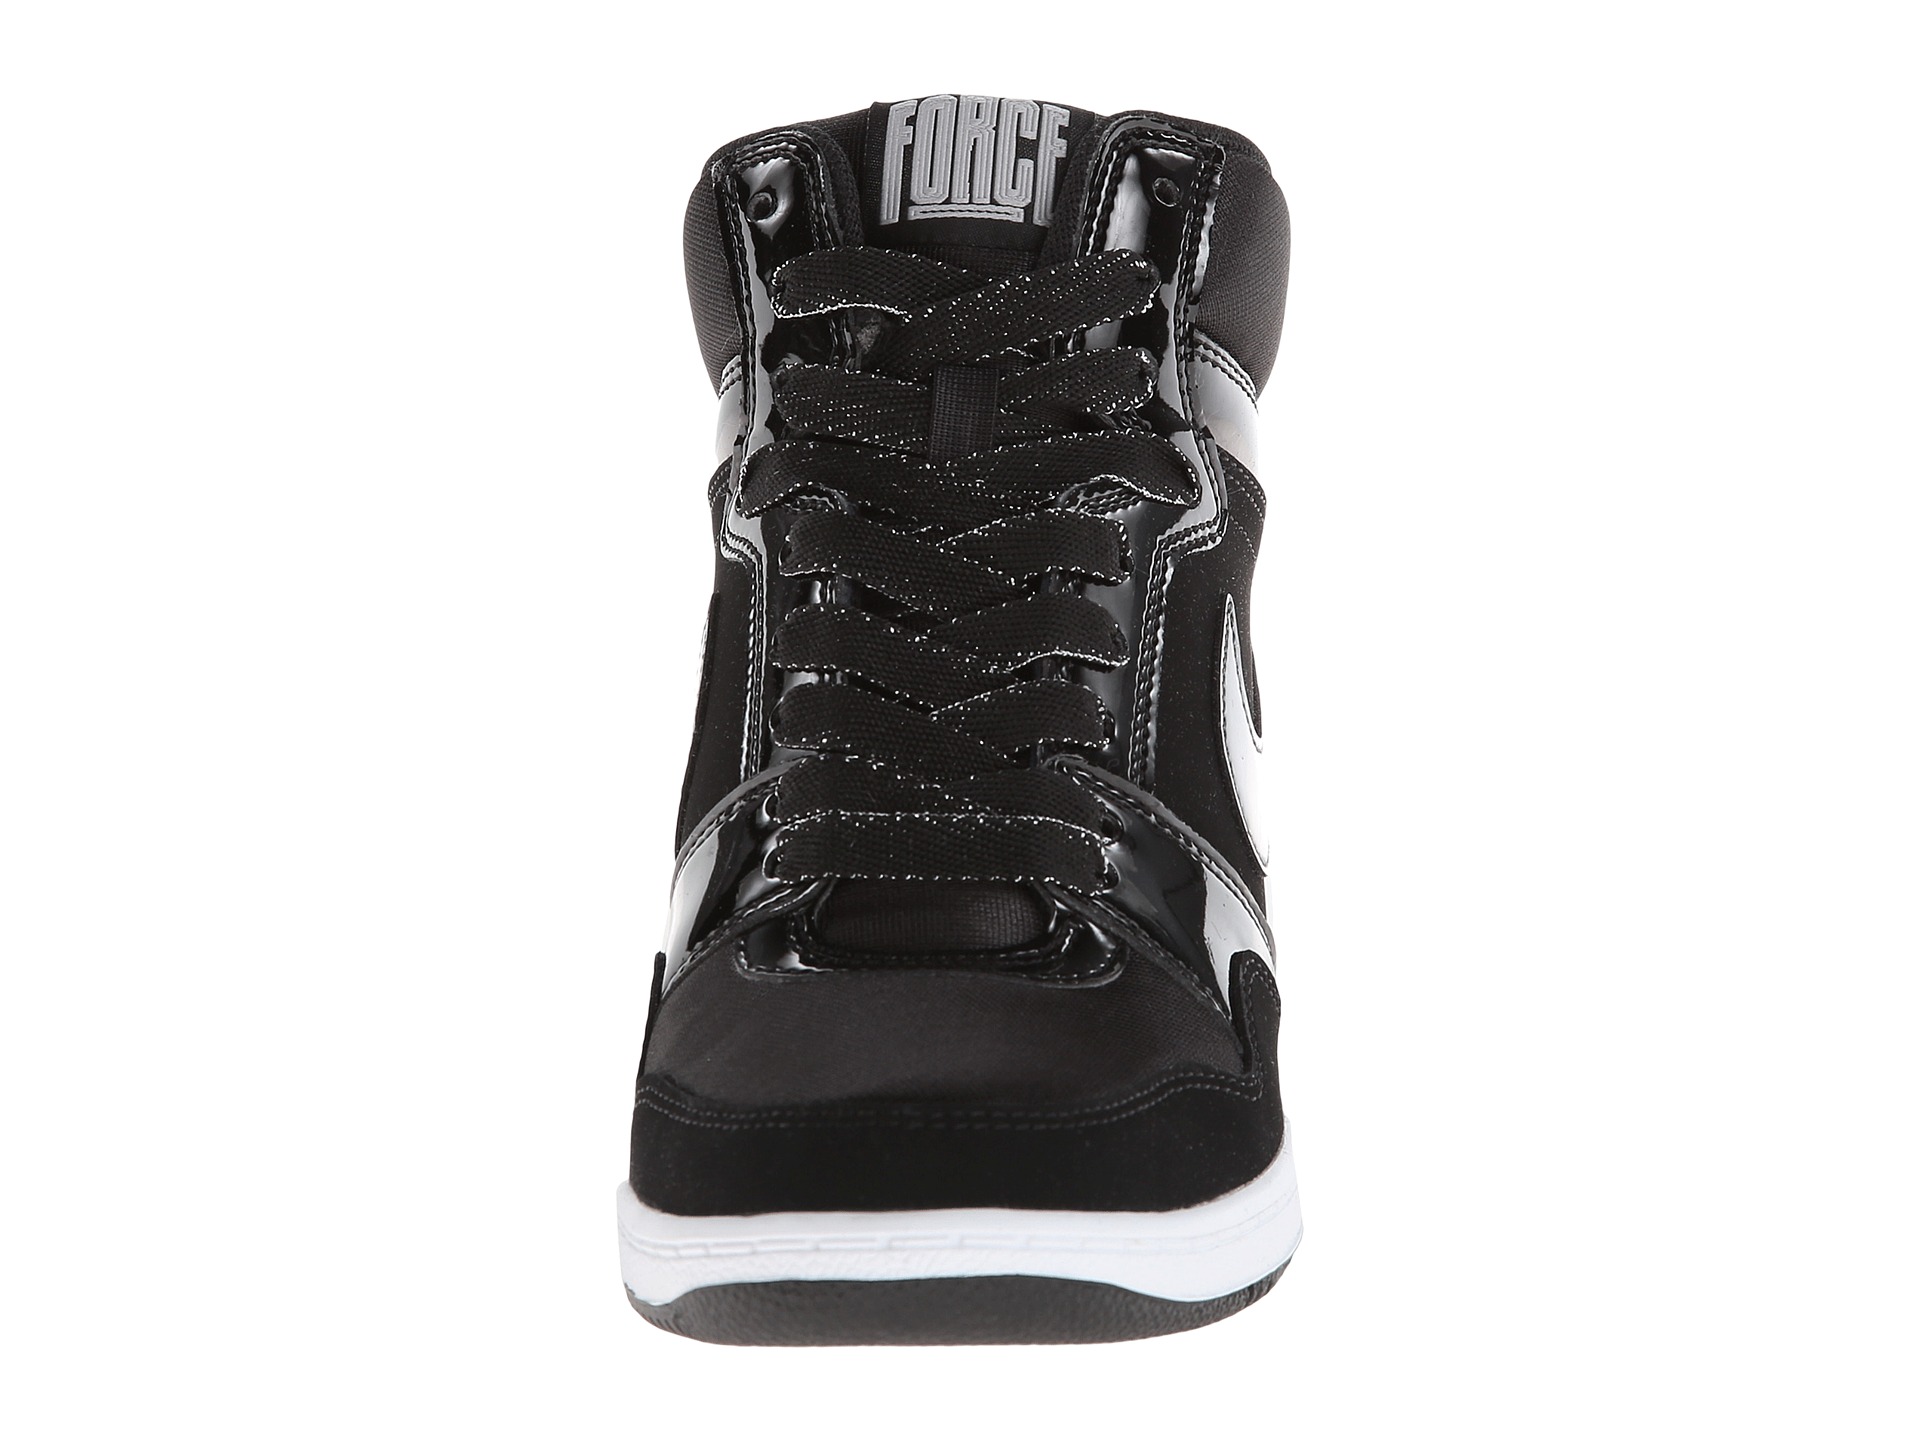 Nike Force Sky High Sneaker Wedge - Zappos.com Free Shipping BOTH Ways